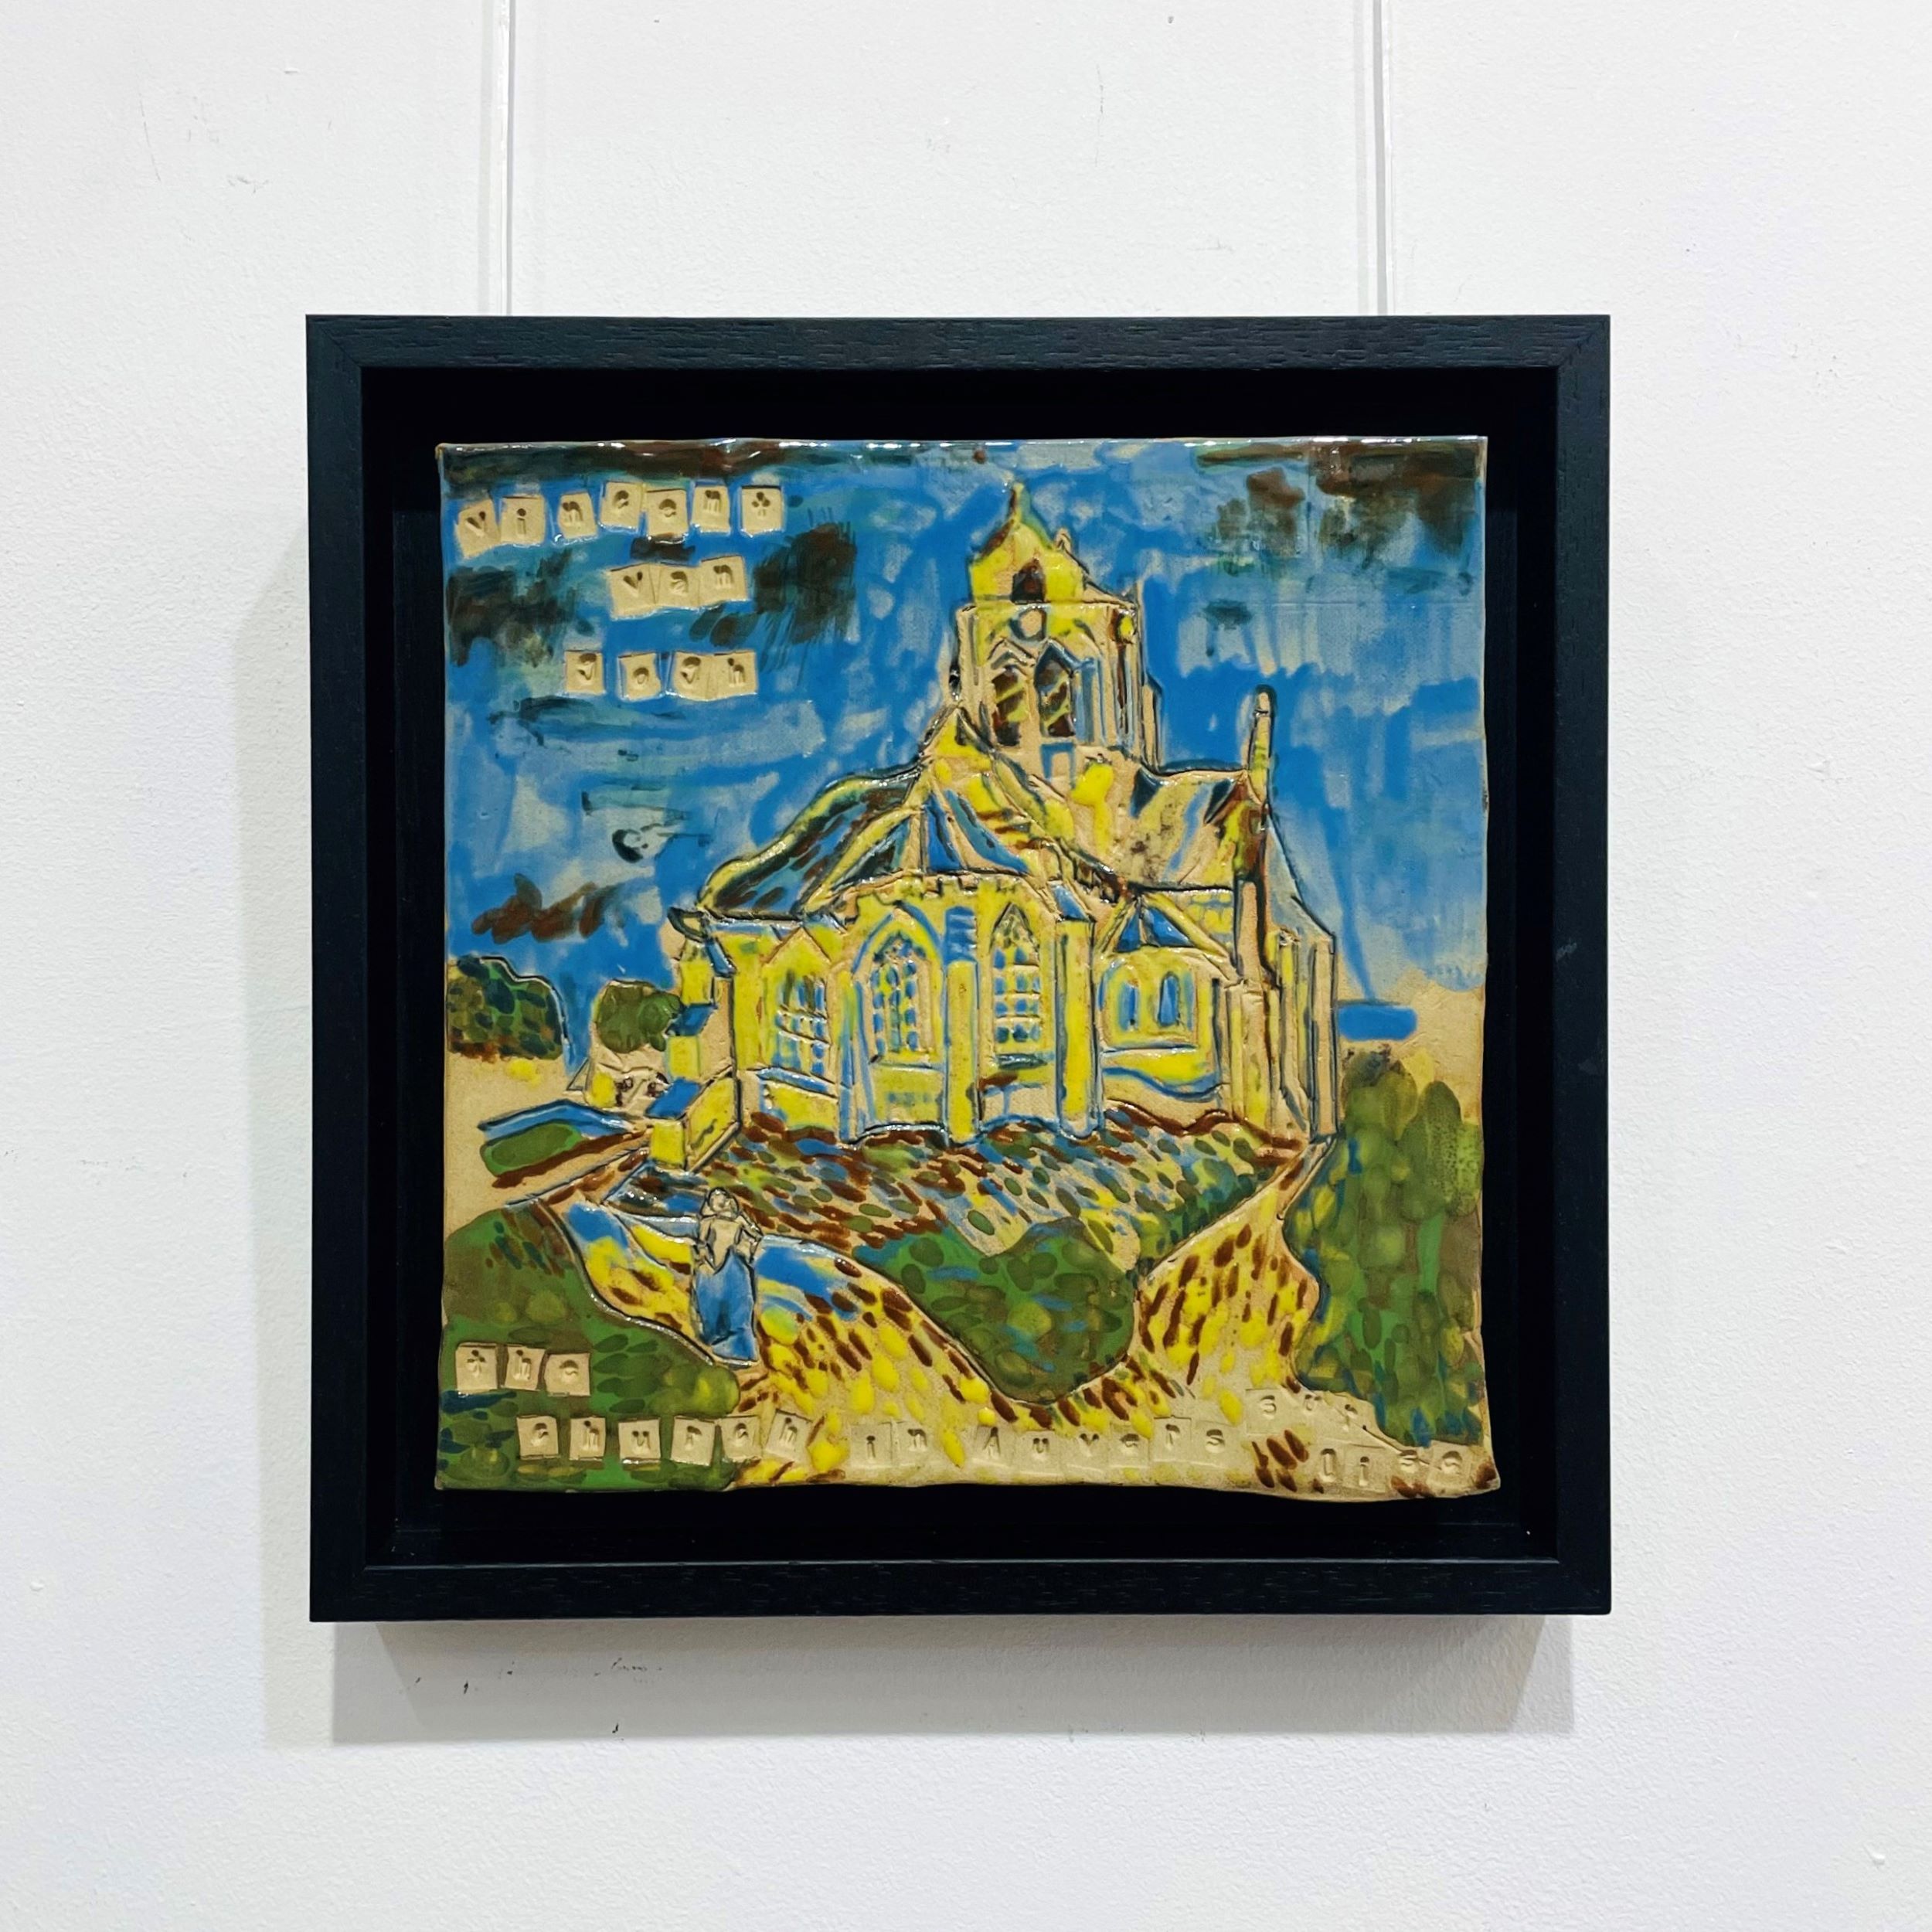 'Church In Auvers' by artist Sian Mathers